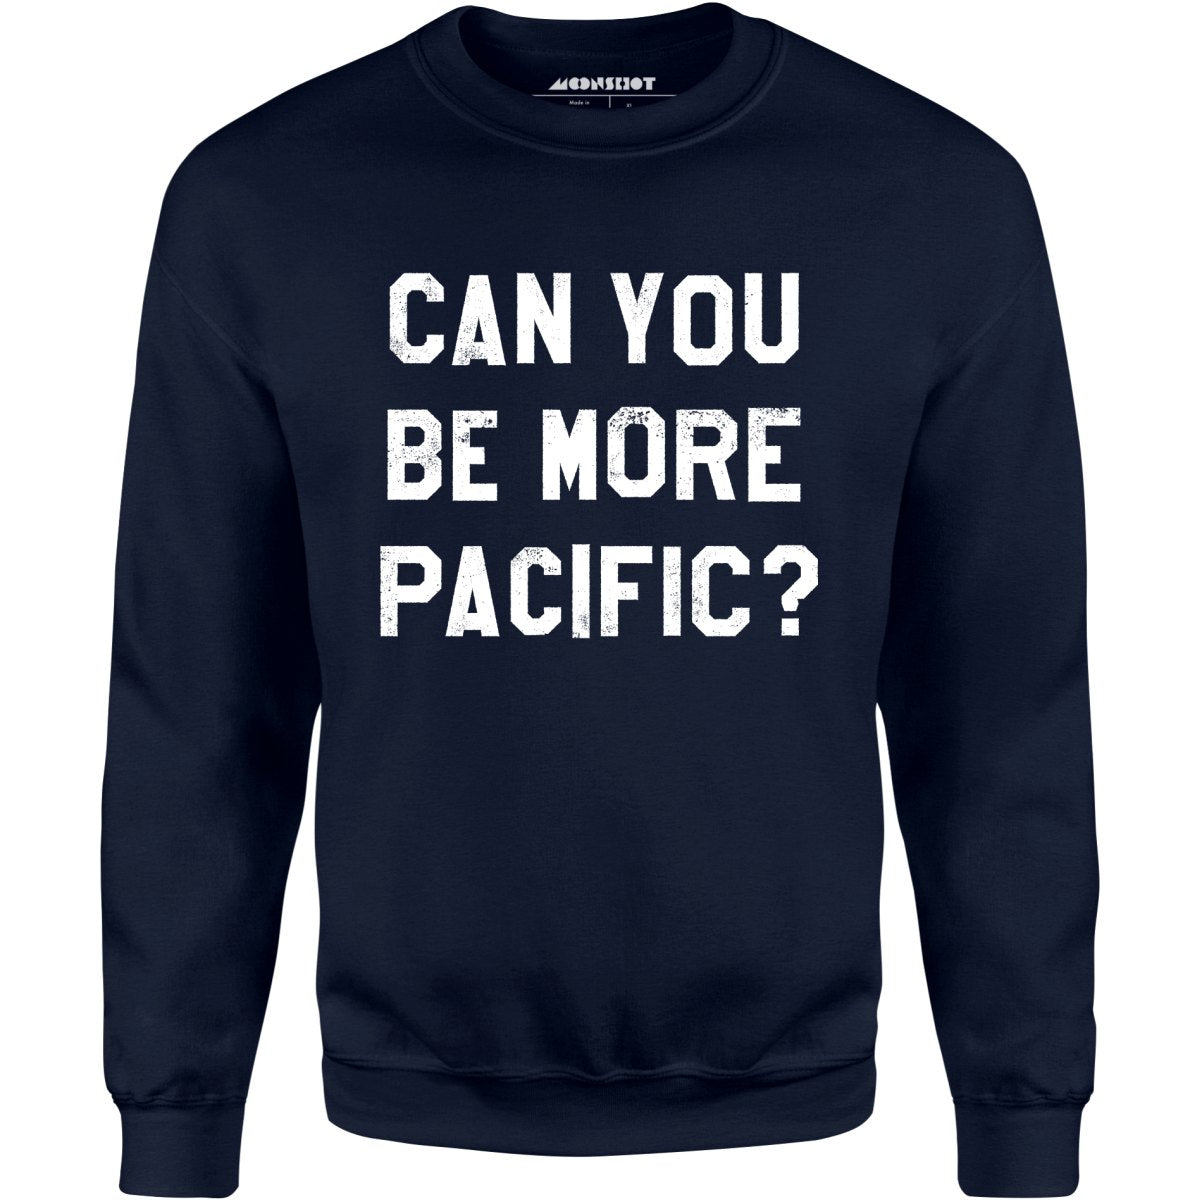 Can You Be More Pacific? - Unisex Sweatshirt